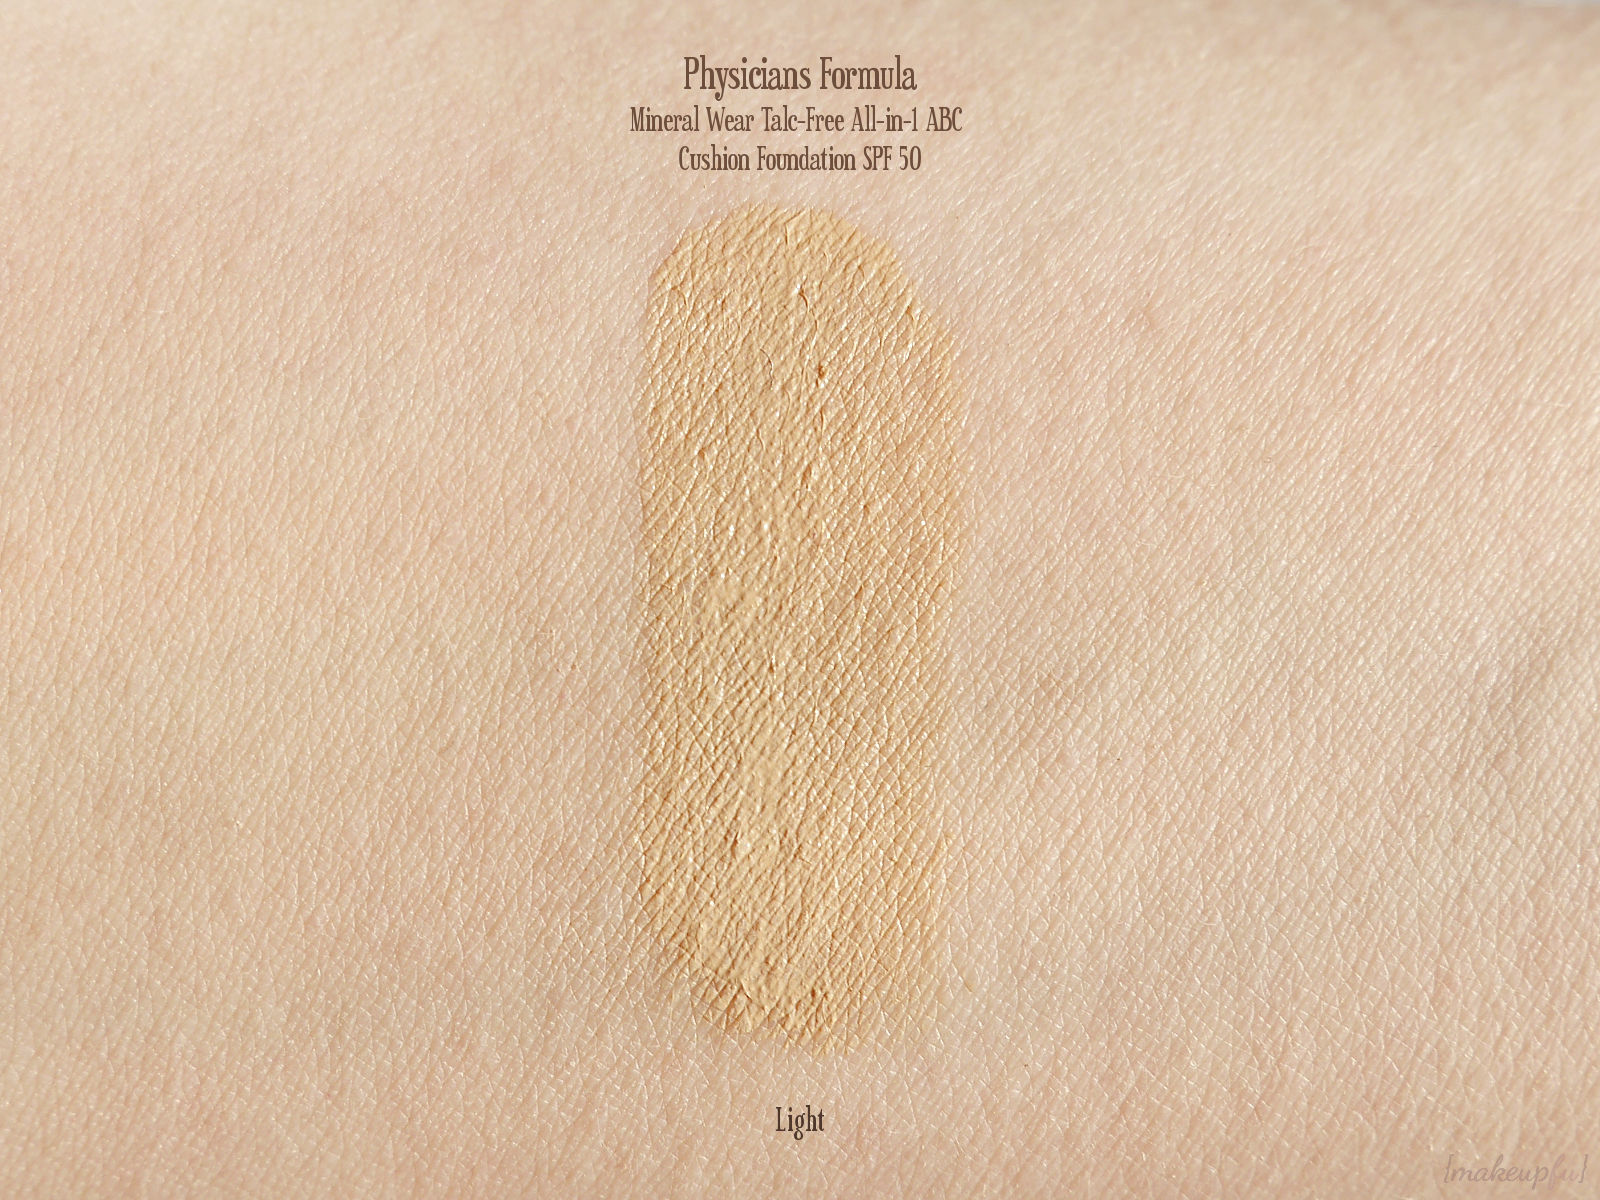 Swatch of the Physicians Formula Mineral Wear Talc-Free All-in-1 ABC Cushio...